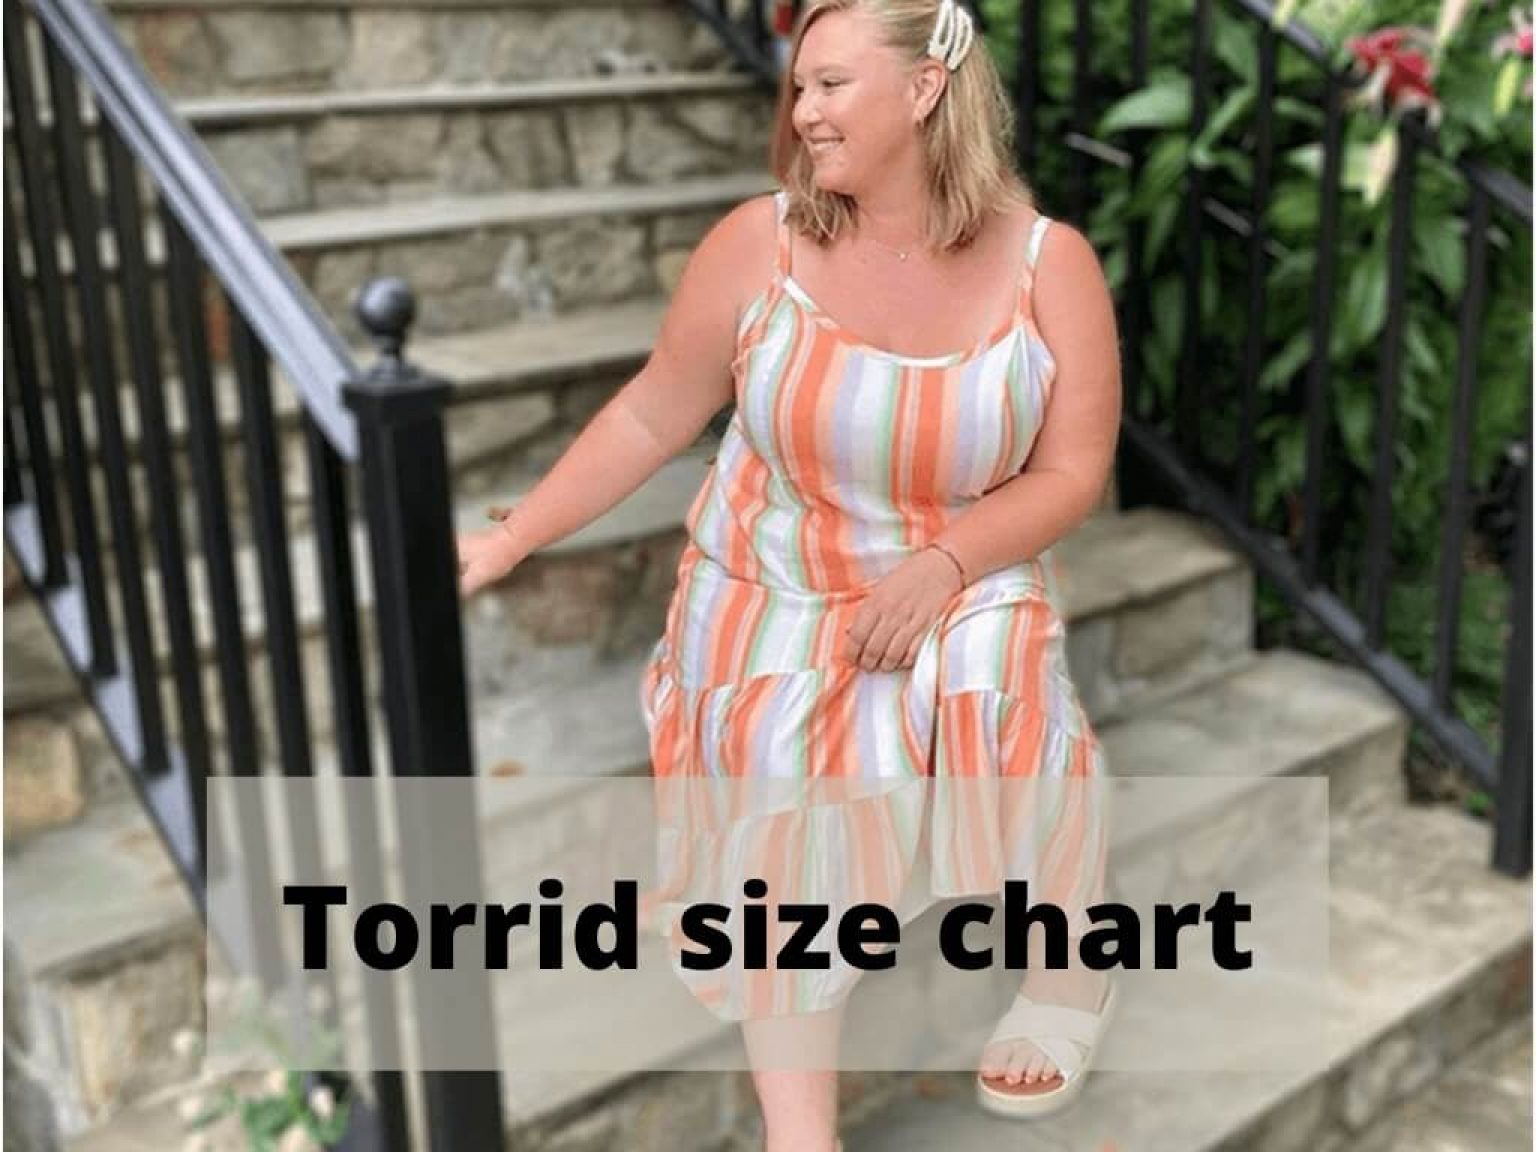 Torrid Size Chart Everything You Need to Know